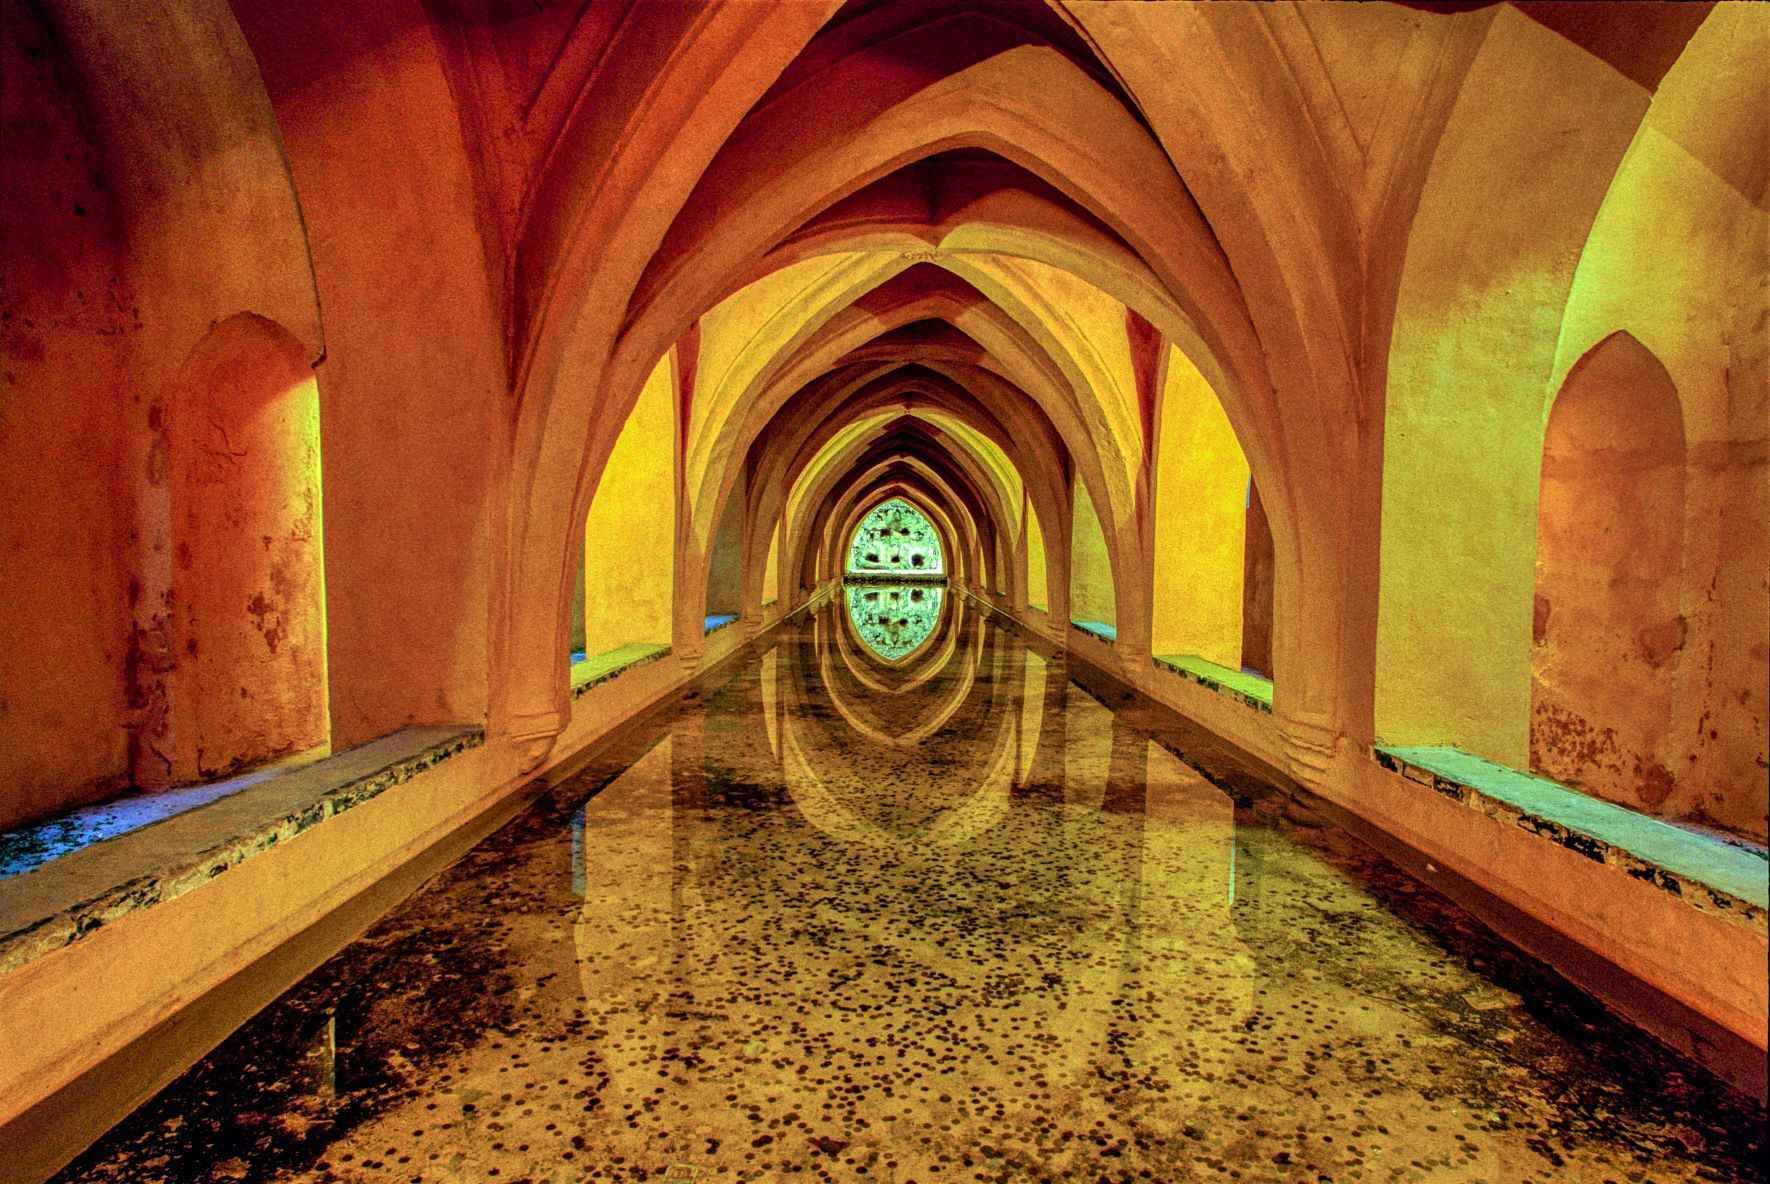 brown and beige tunnel with lights and water running through it